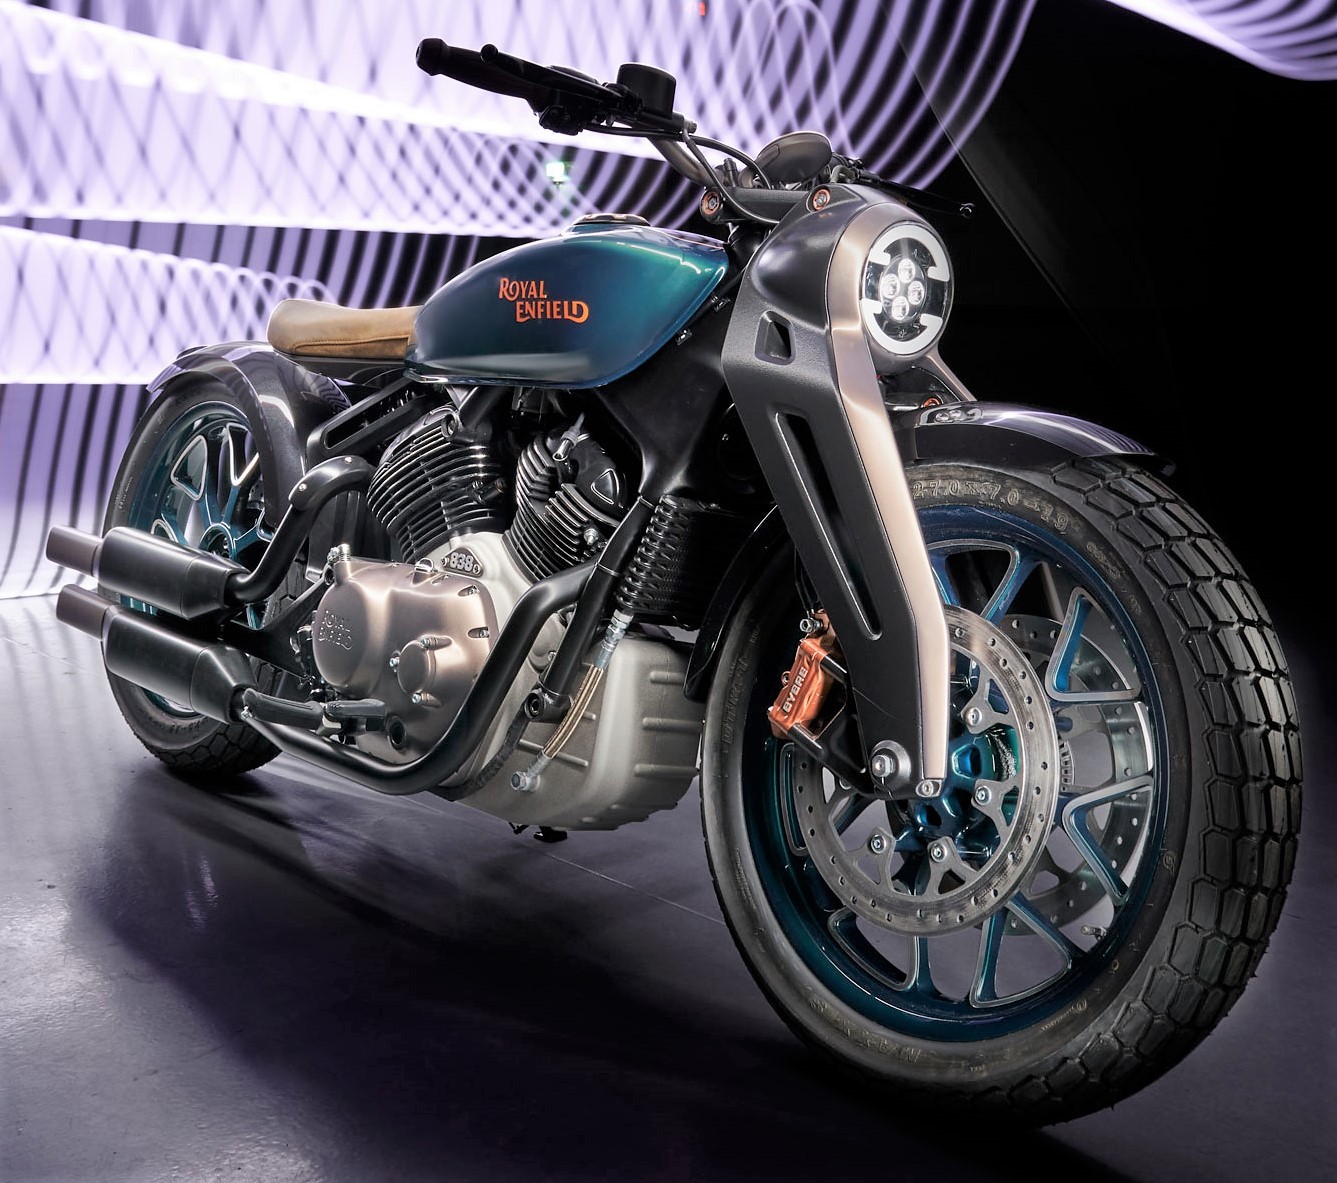 Royal-Enfield-Concept-KX-Specifications-1.jpg